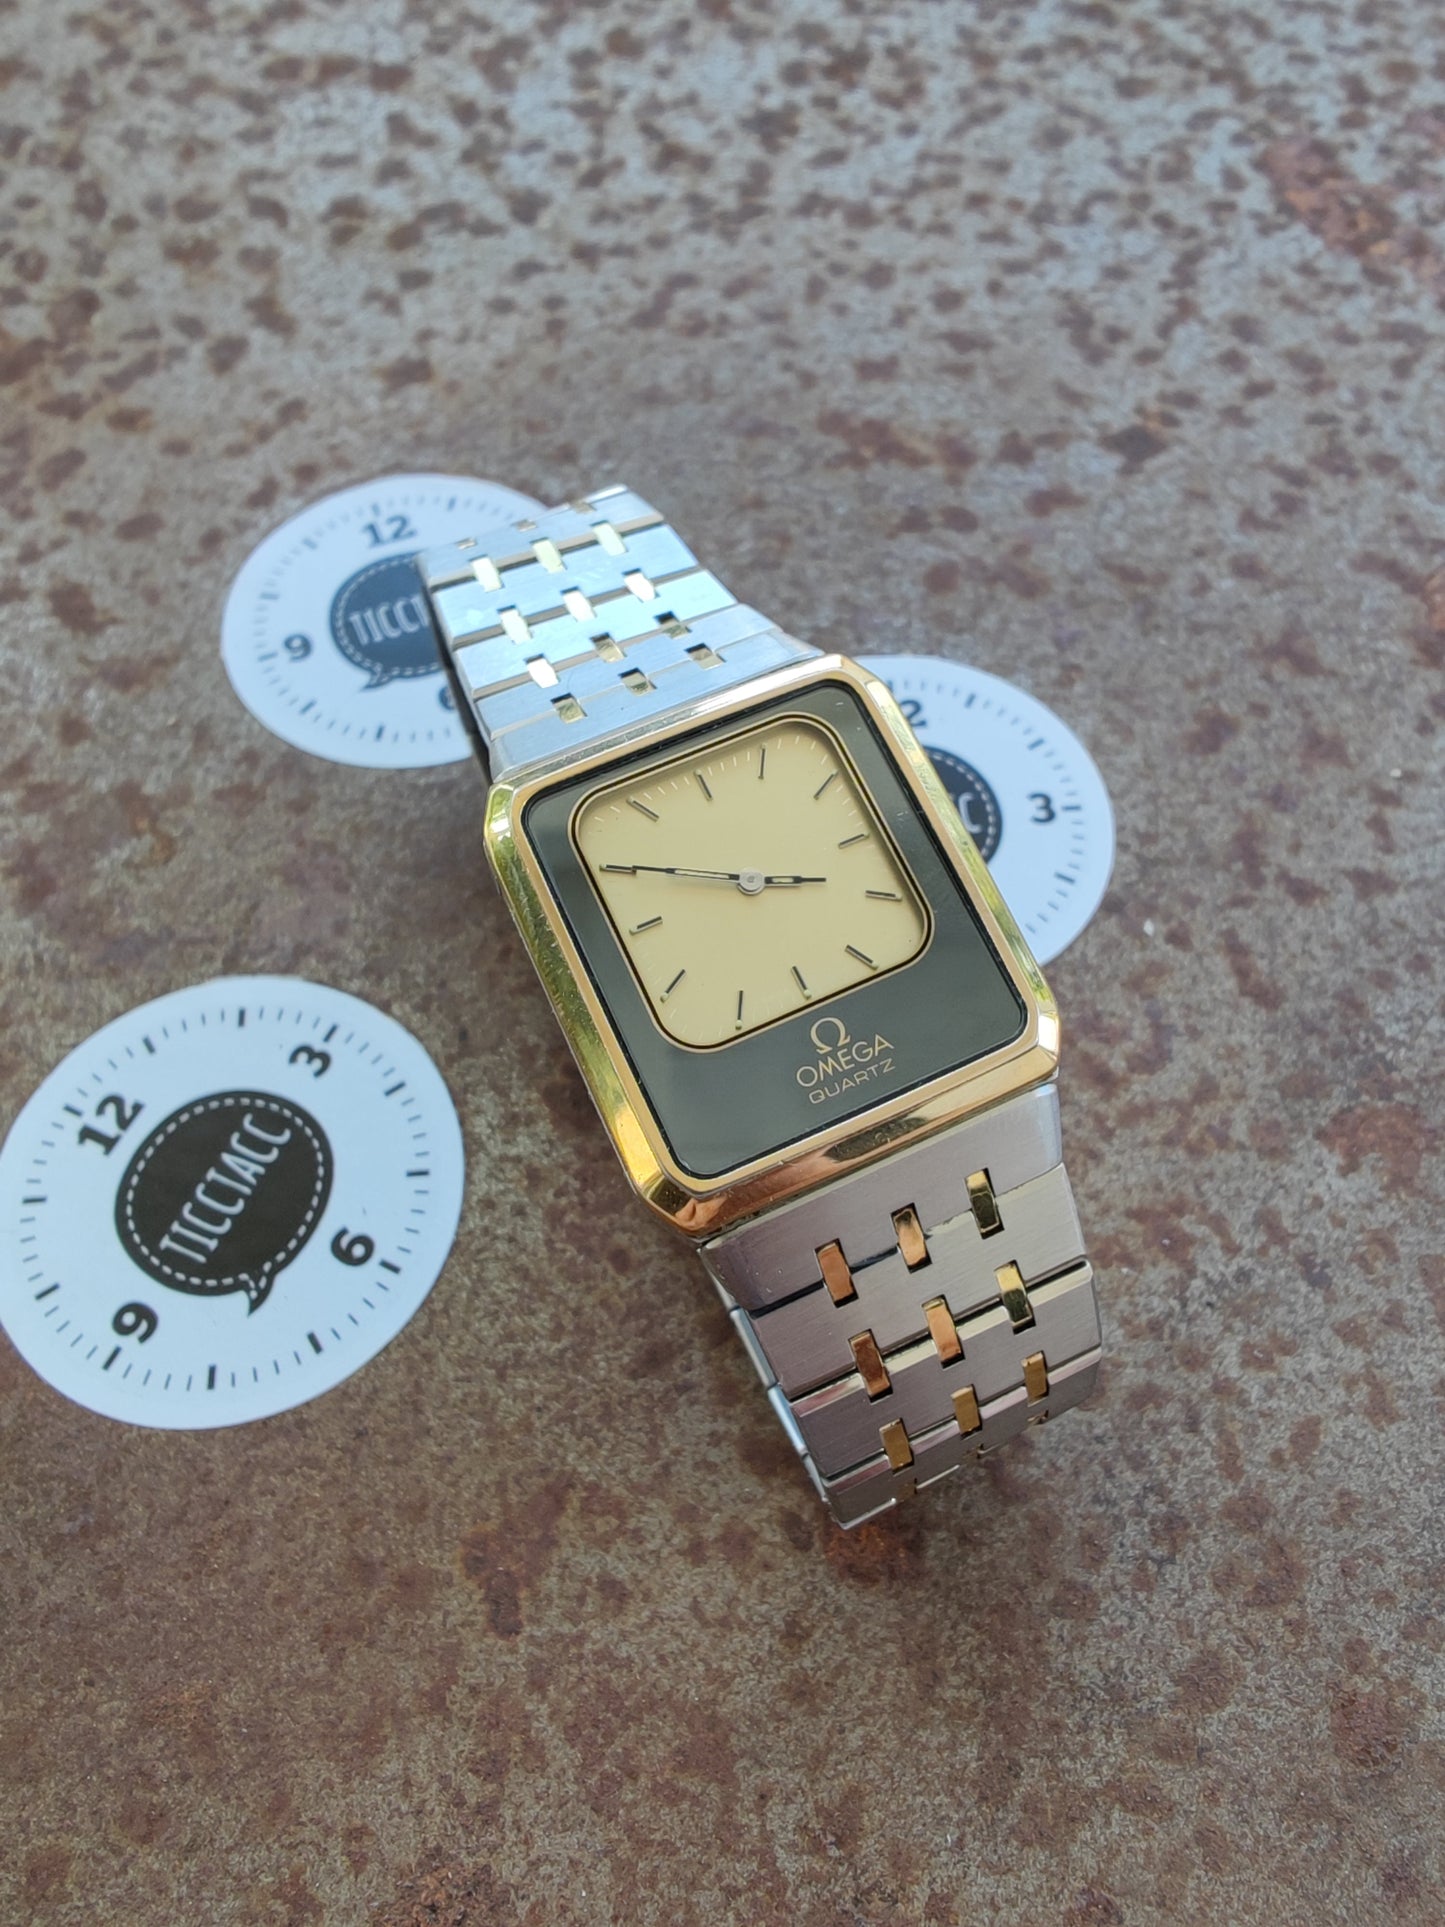 SOUND WORKING & MINT+++OMEGA Equinoxe Reverso 186.0013 cal1655 bicolor